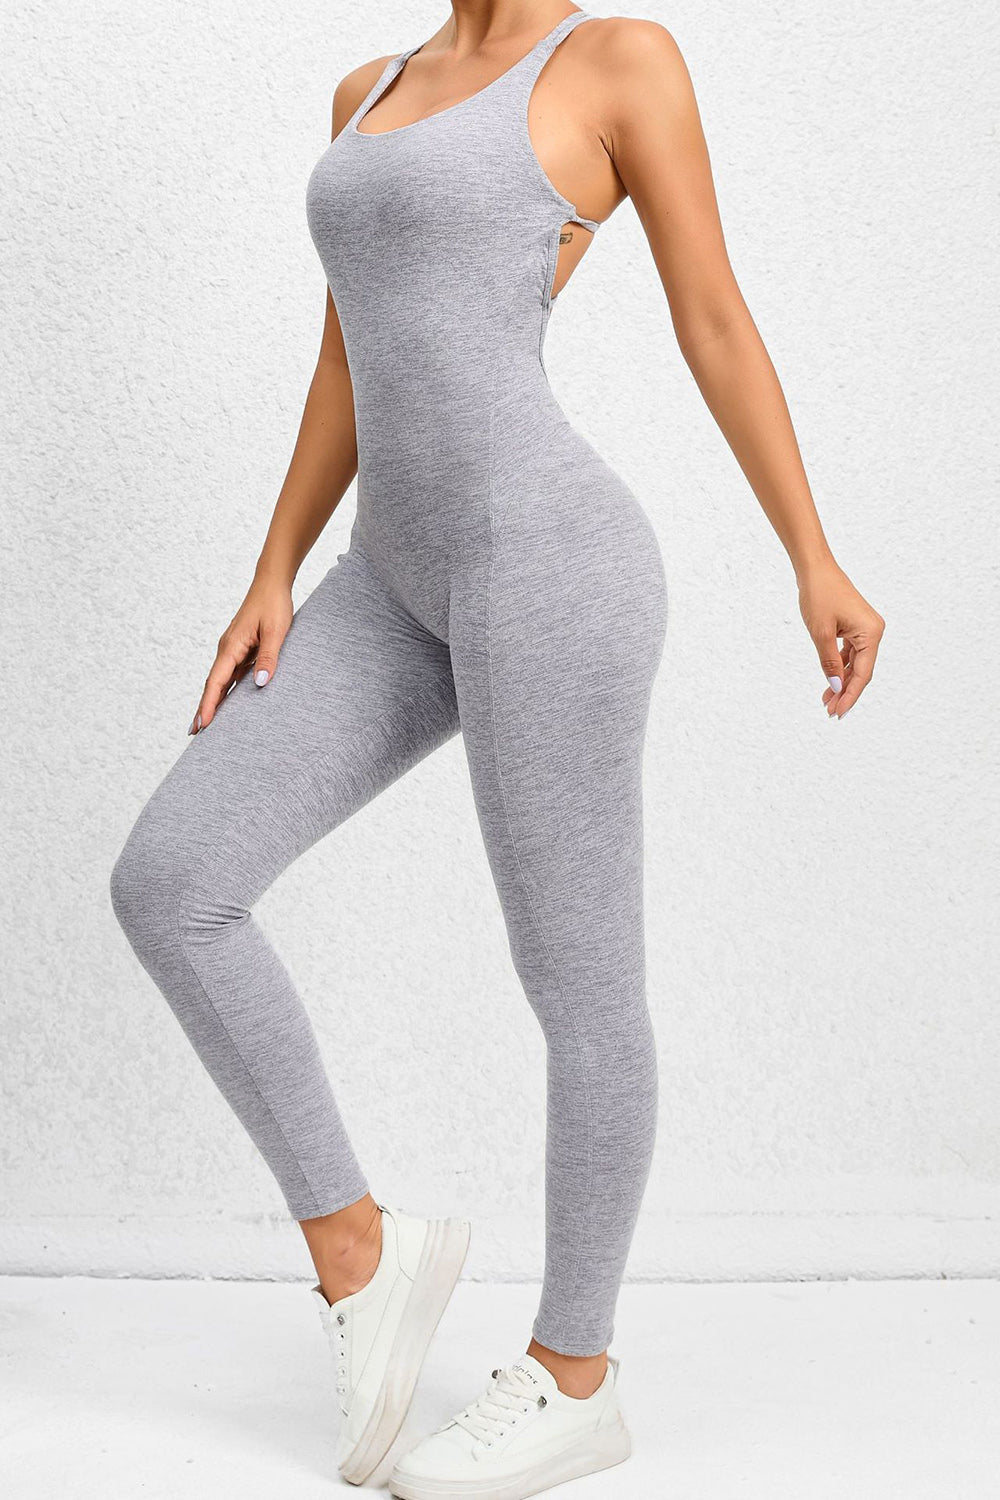 grey jumpsuits, comfortable clothes, nice clothes, cheap clothes,  confortable designer clothes, sexy comfy clothes, nice clothes, trending fashion, fashion 2024, fashion 2025, house clothes, travel clothes, vacation outfit ideas, designer fashion, outfit ideas, fashion photoshoot ideas, gym clothes